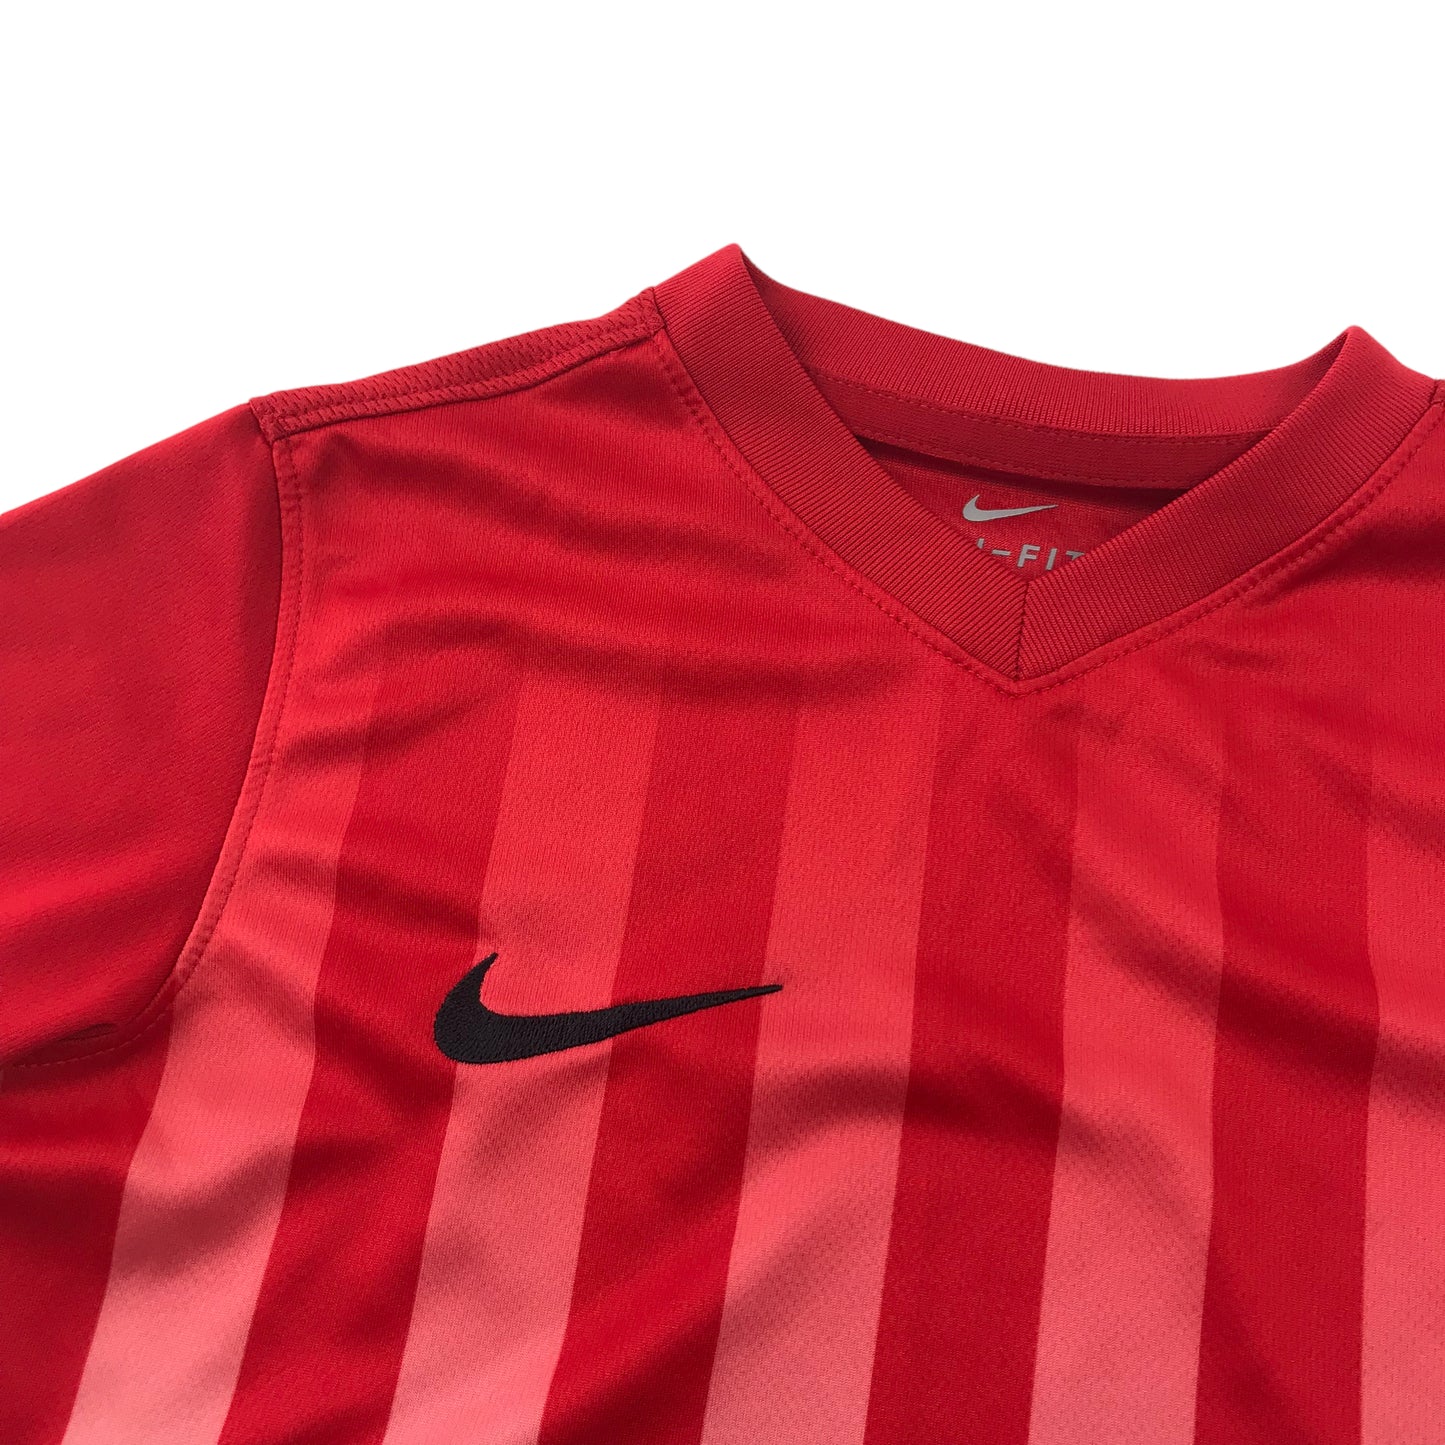 Nike Red Gradient Stripes Football Sports Top Age 7